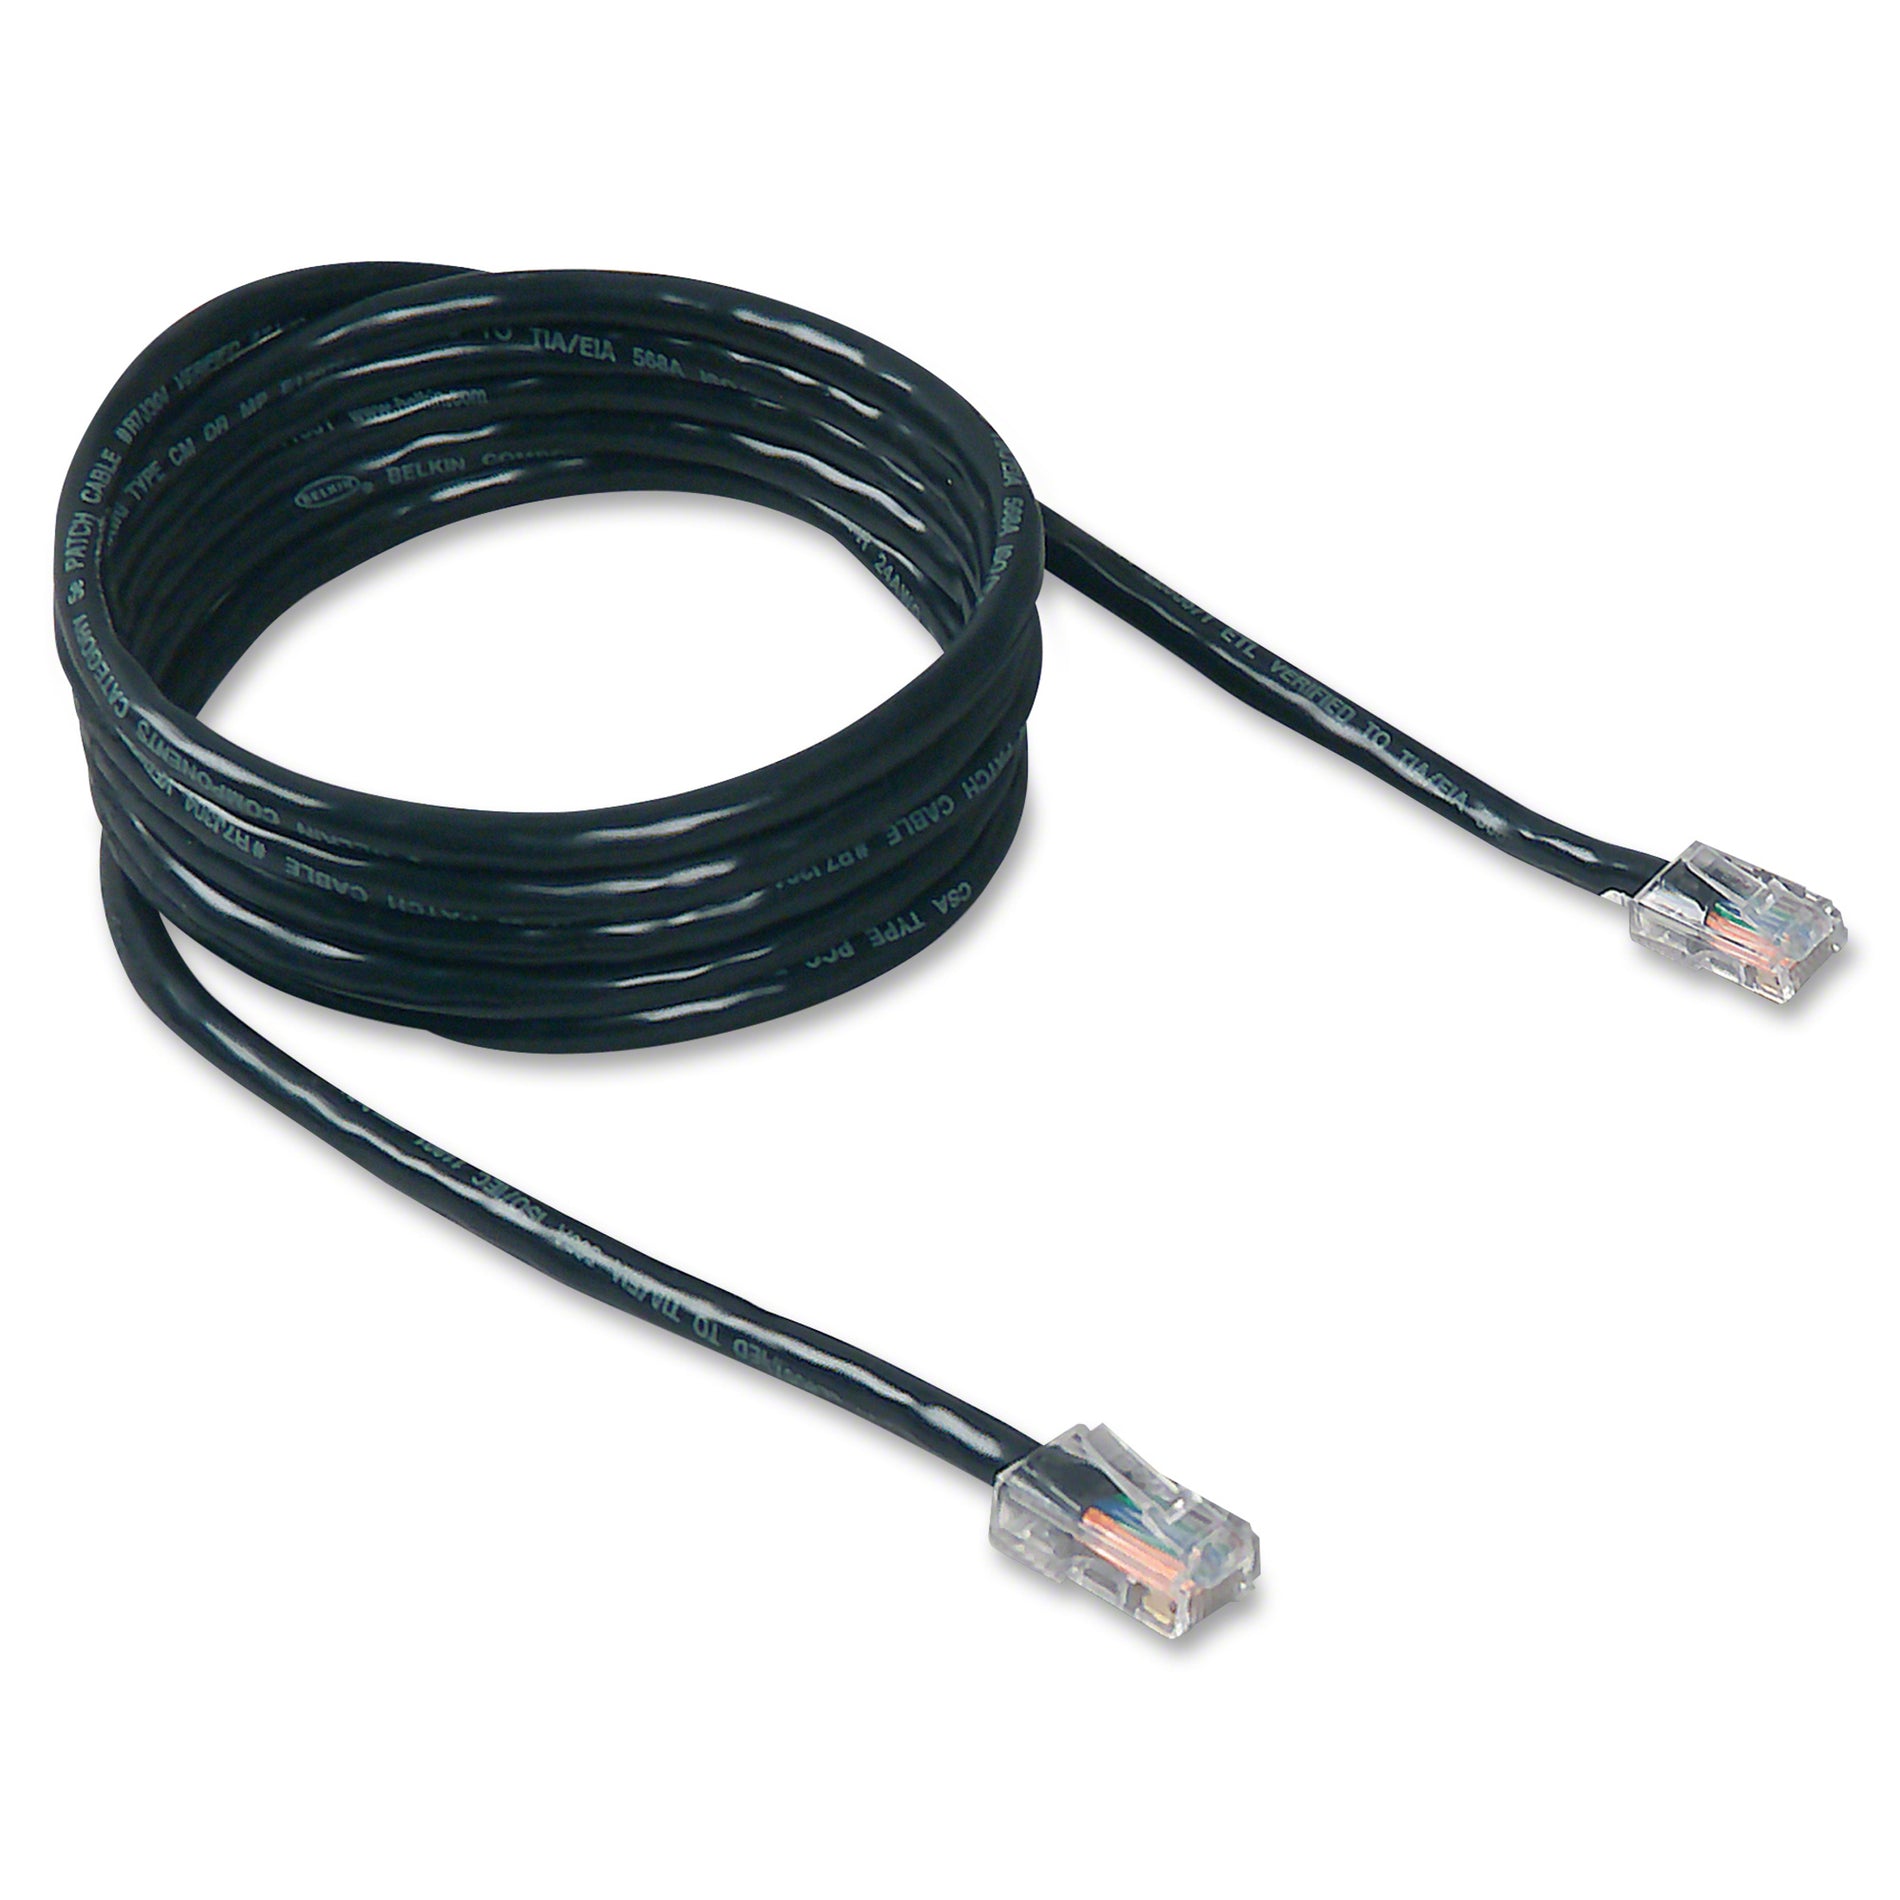 Belkin A3L791-03-BLK-S RJ45 CAT5e Snagless Patch Cable, 3 ft, Perfect for Home and Office Networks